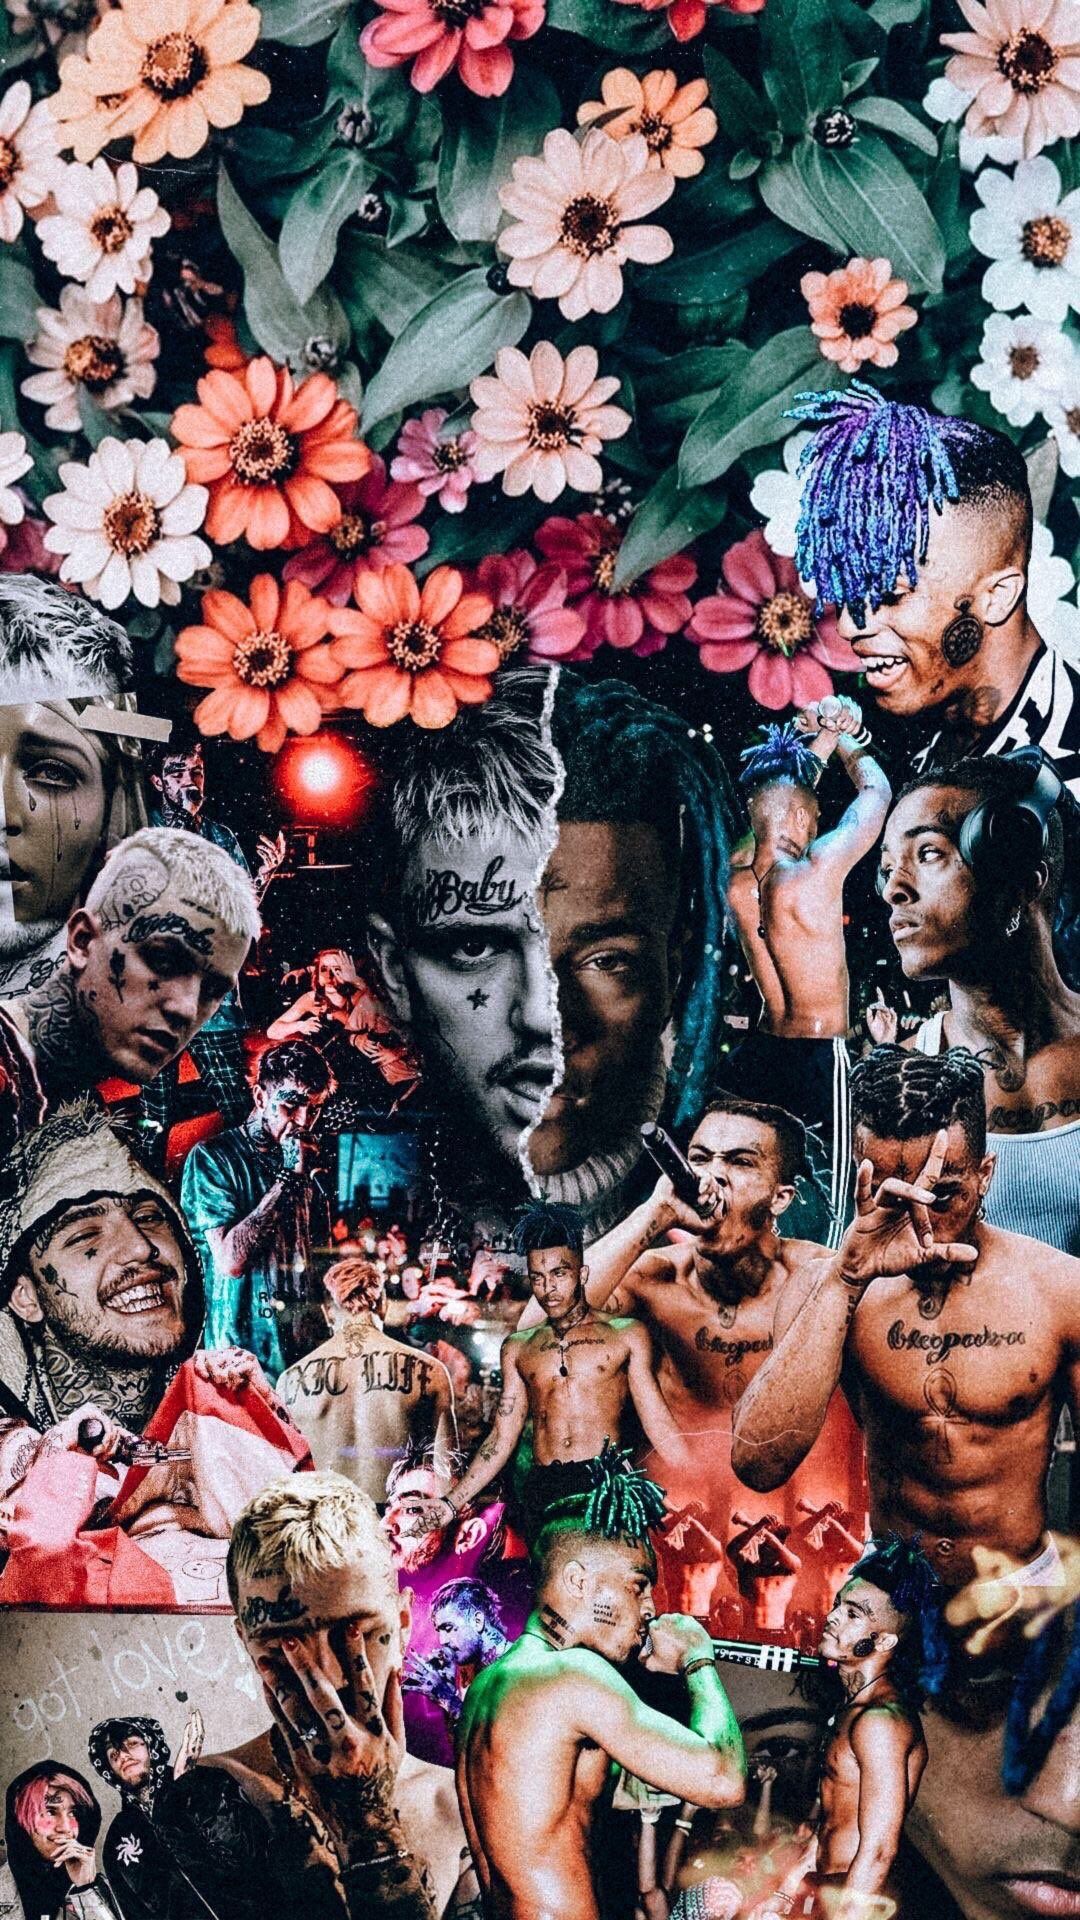 A collage of many different pictures with flowers - XXXTentacion, Lil Peep